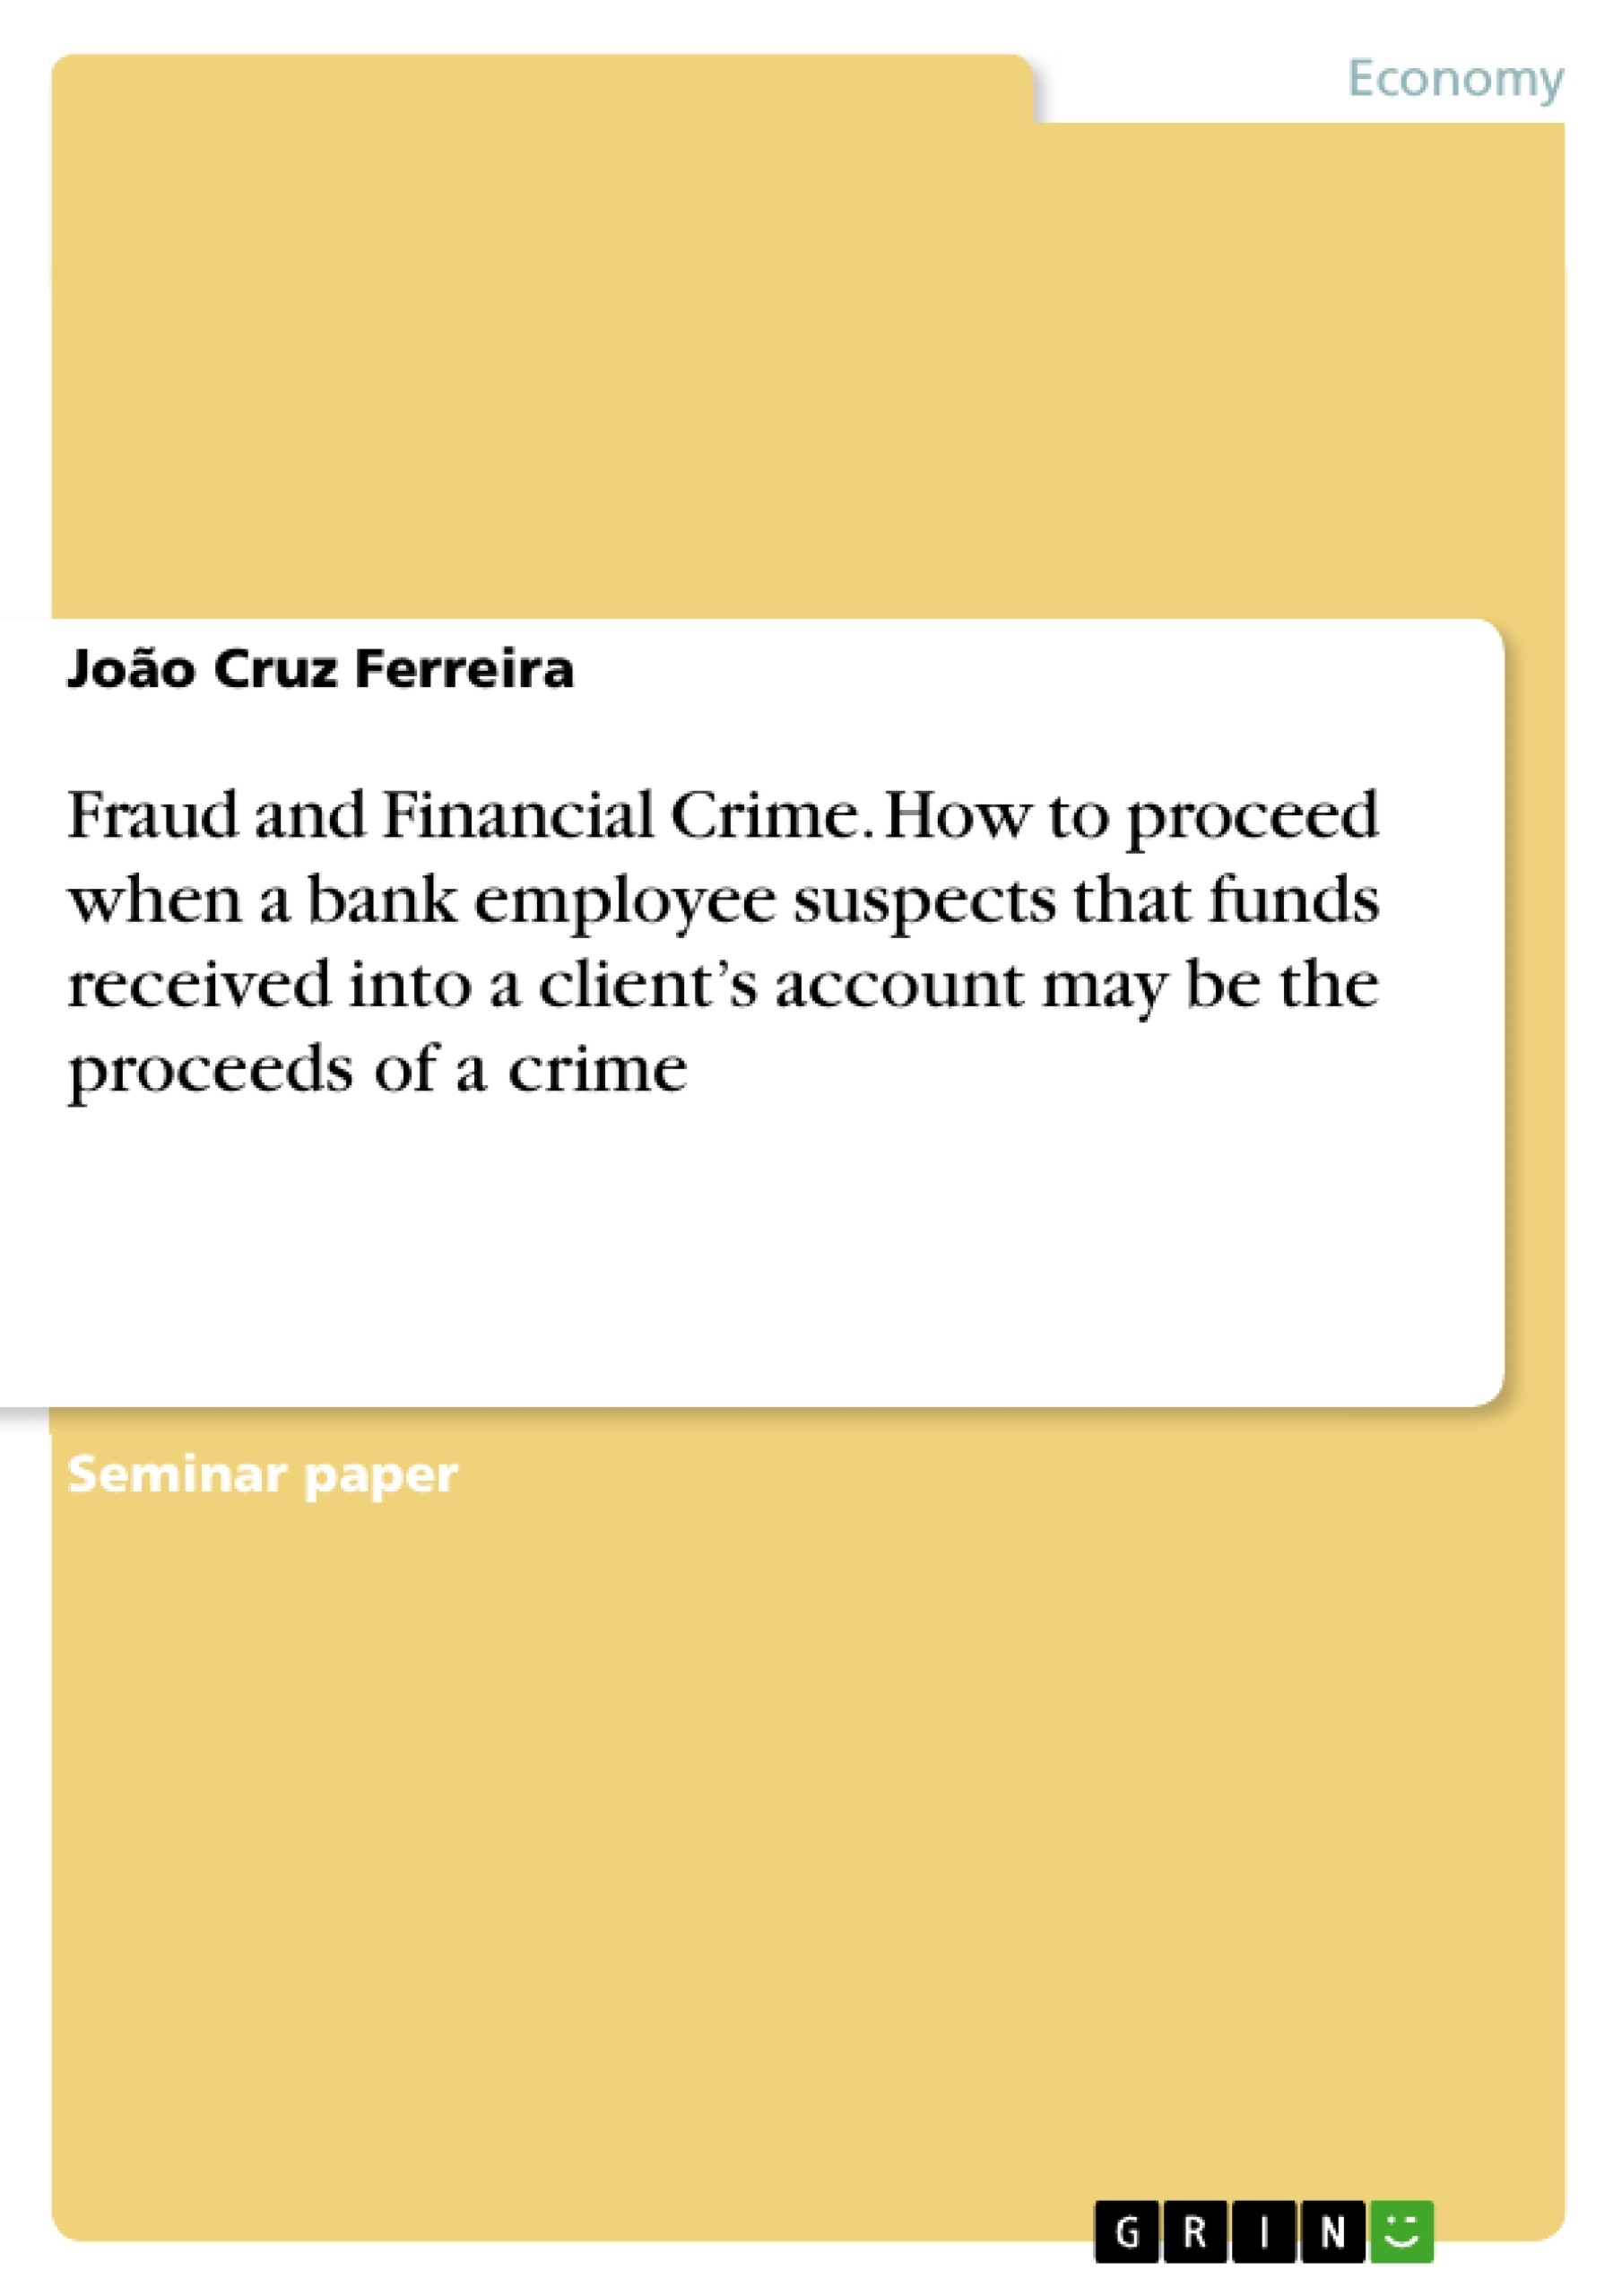 Titel: Fraud and Financial Crime. How to proceed when a bank employee suspects that funds received into a client’s account may be the proceeds of a crime